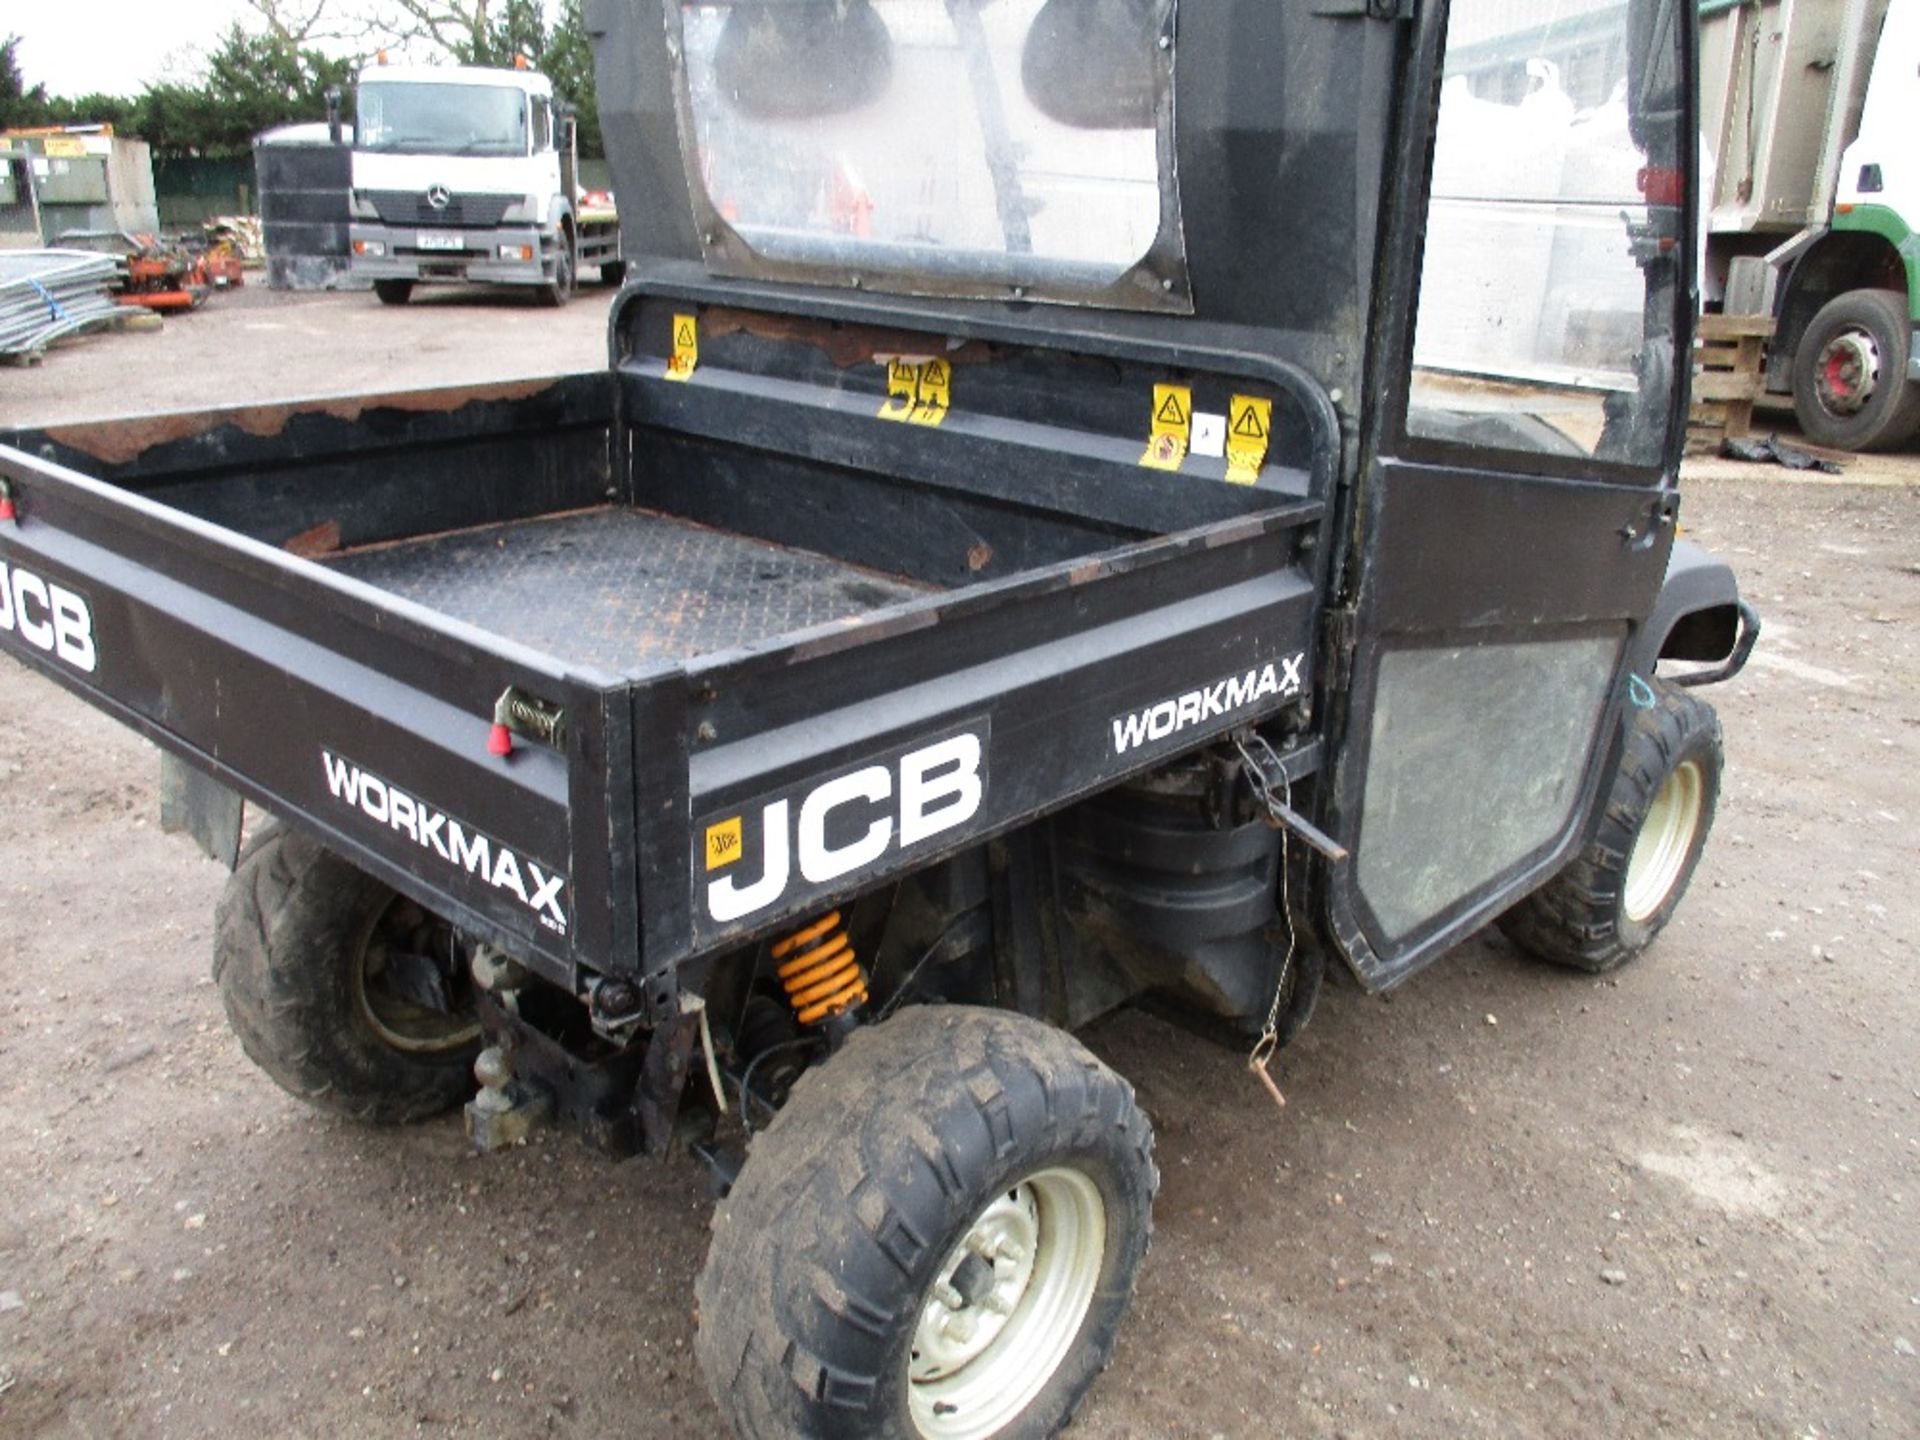 JCB Workmax off road utility vehicle year 2012 build. - Image 6 of 9